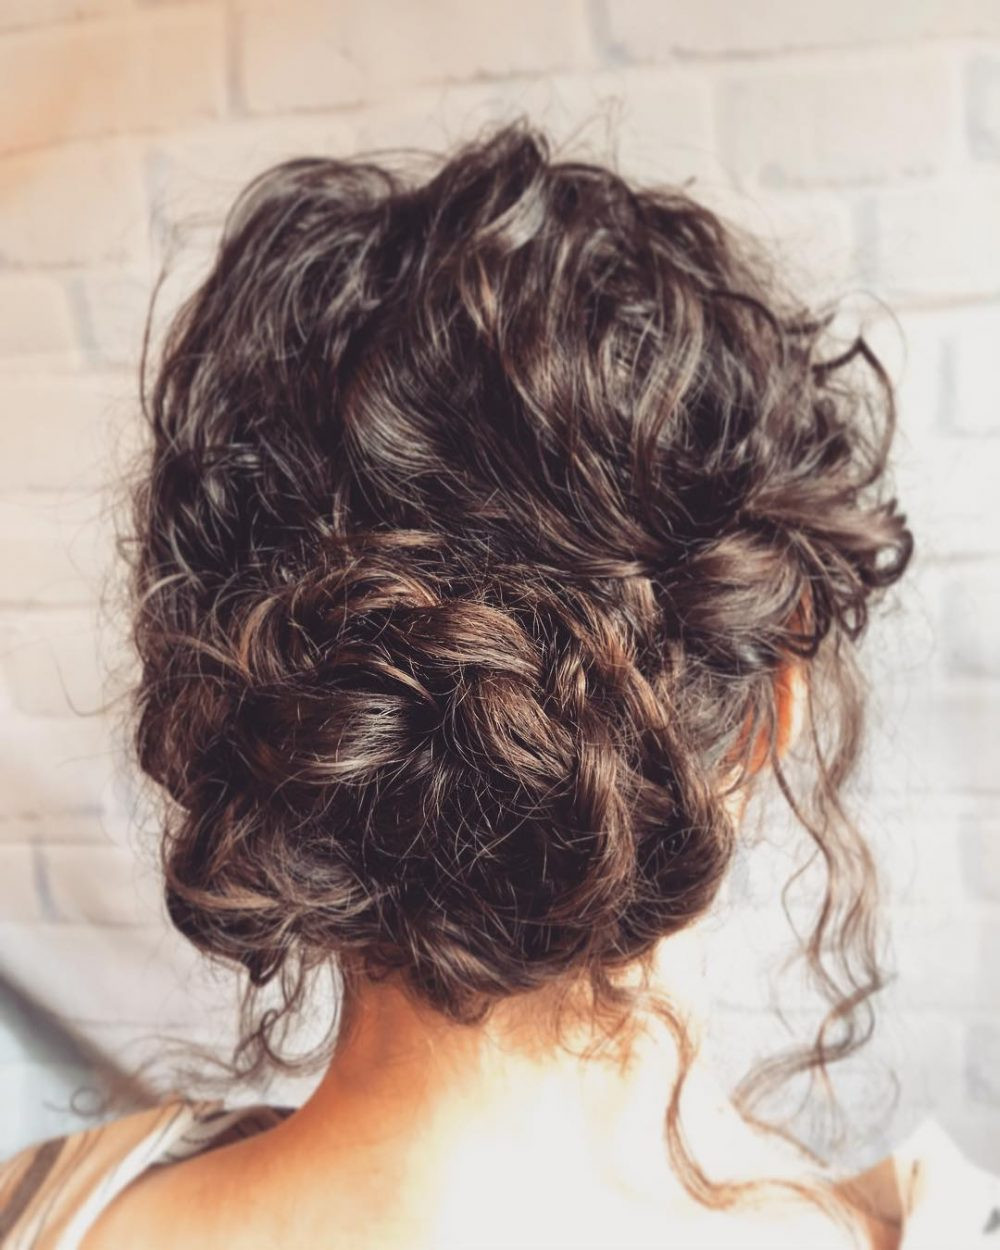 Prom Hairstyles Curled Hair
 18 Stunning Curly Prom Hairstyles for 2019 Updos Down